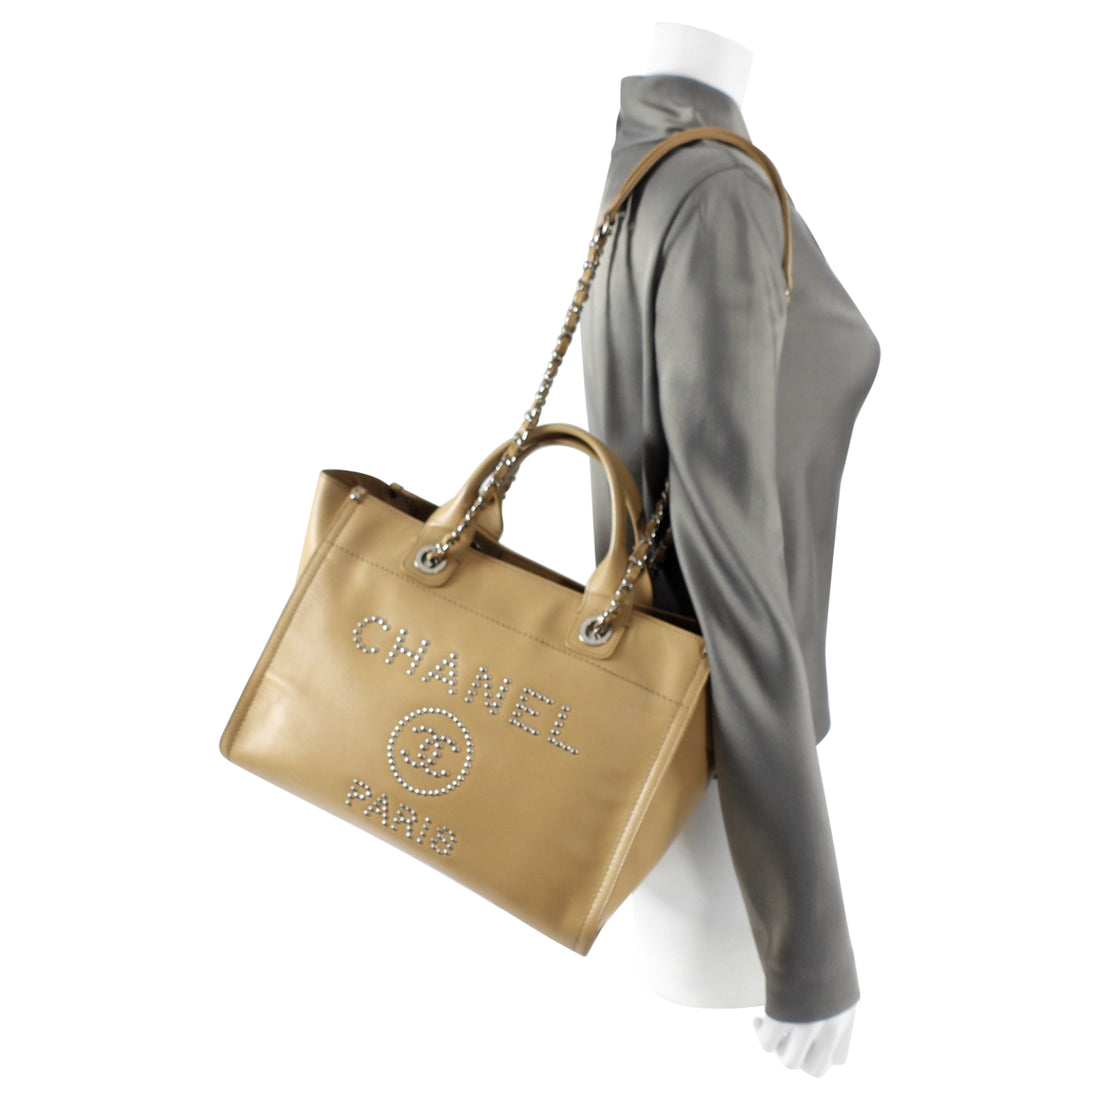 Chanel Beige Leather Large Studded Deauville Tote Chanel